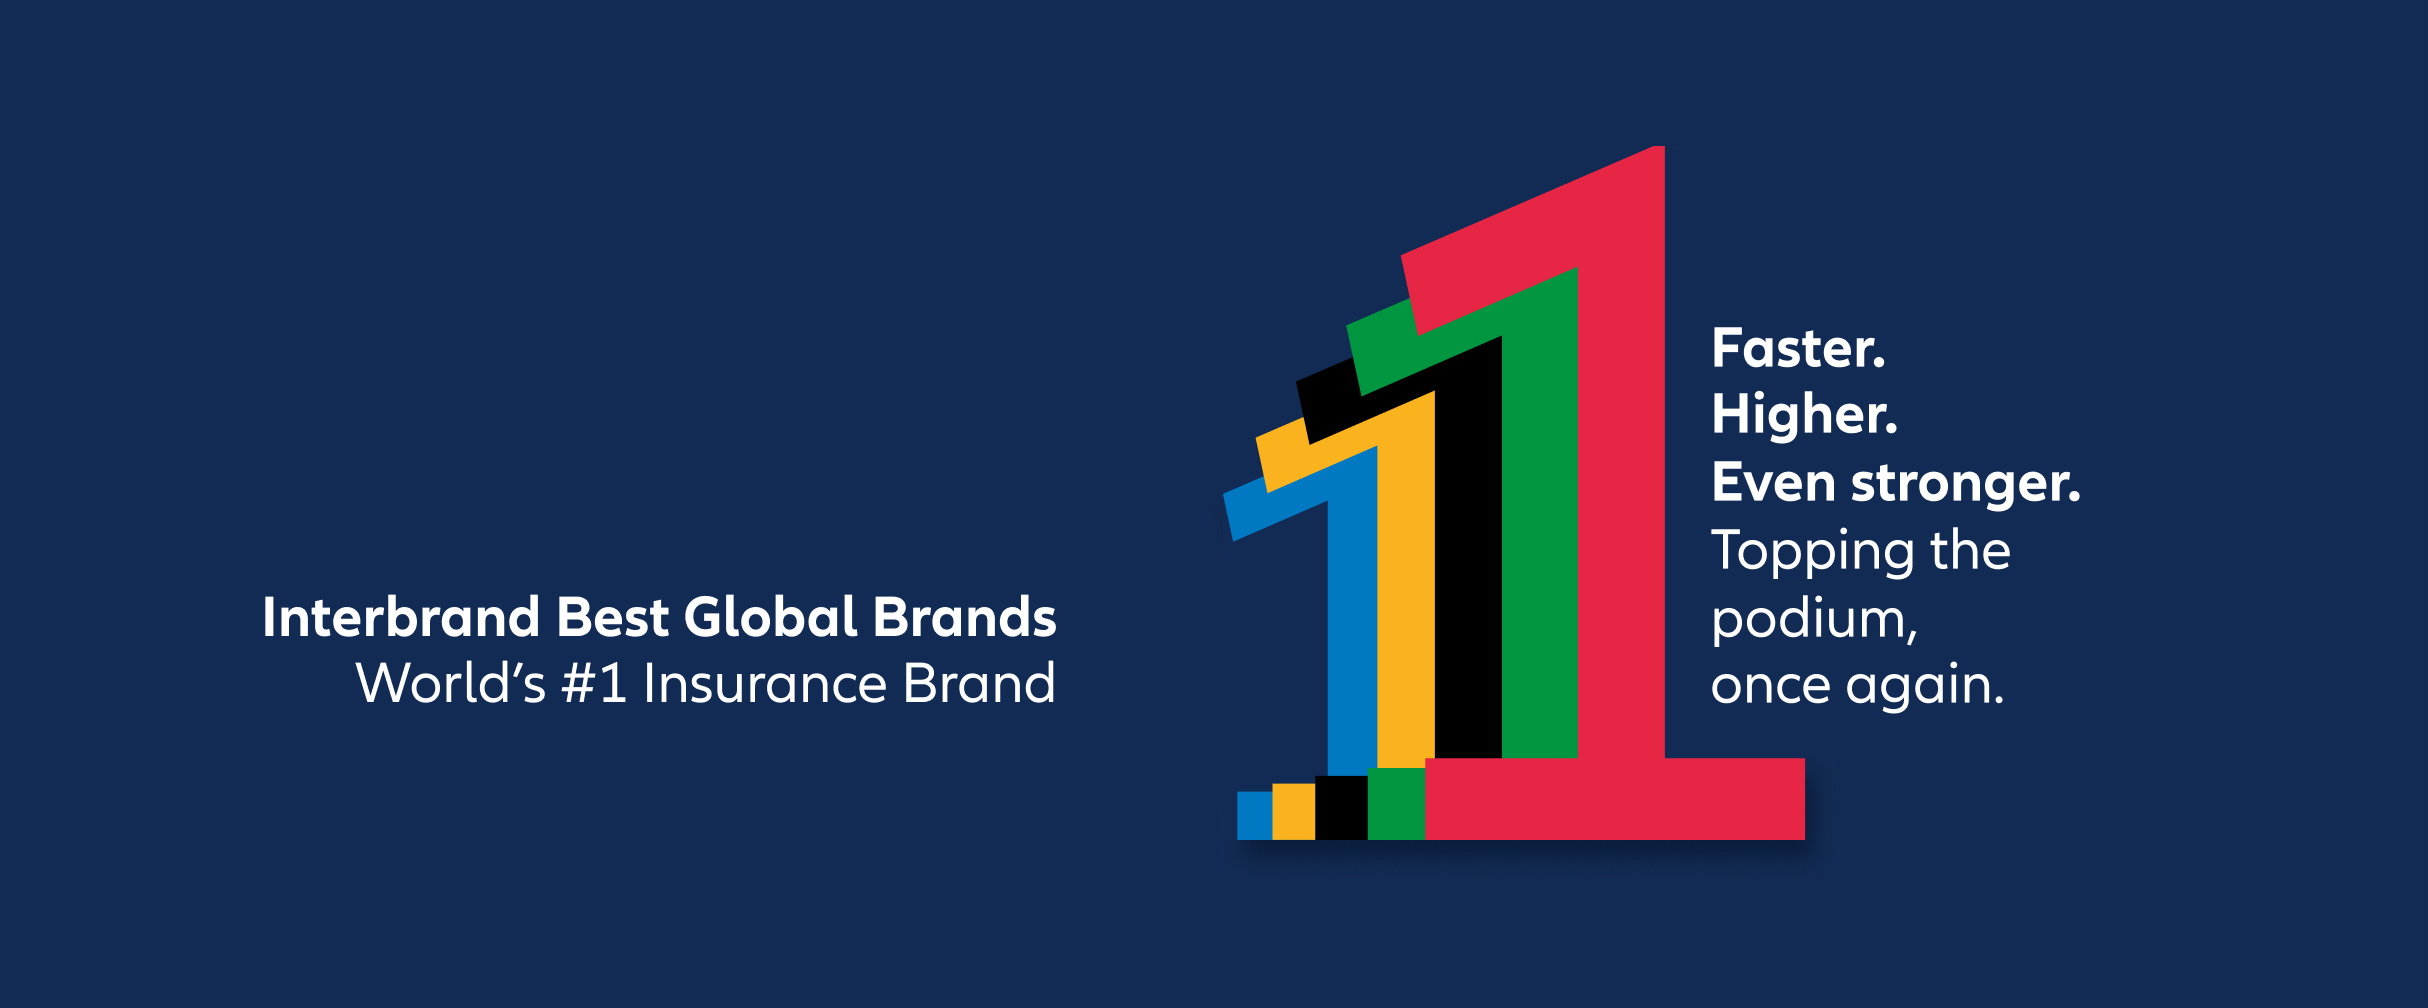 Superimposed colorful graphics consisting of typographic ones with the headline " Interbrand Best Global Brands. World's #1 Insurance Brand.Faster. Higher. Even stronger. Topping the podium, once again." 